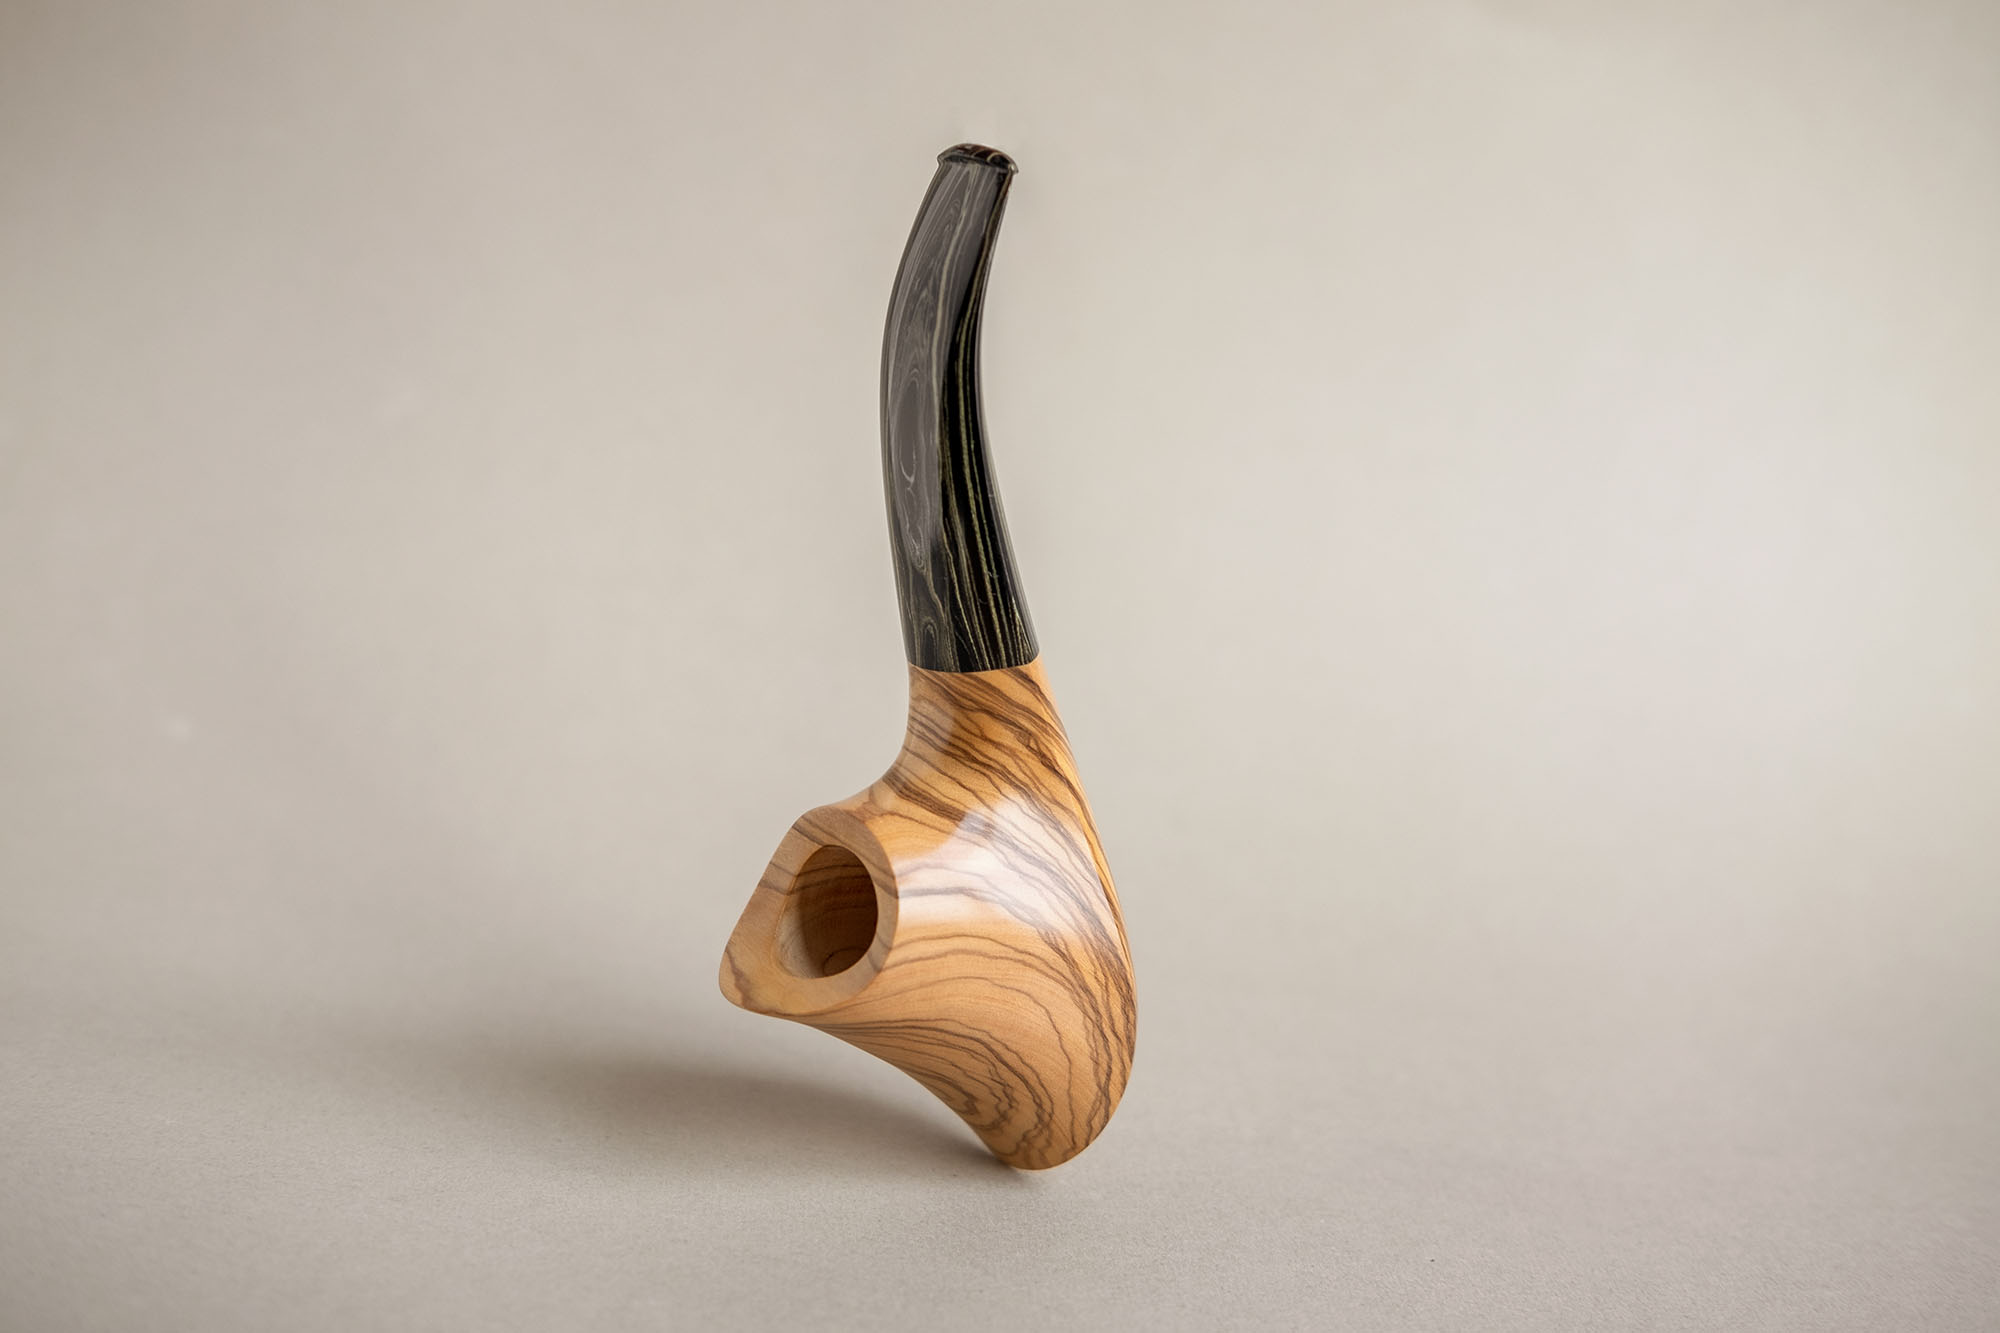 Volcano smoking pipe handcrafted by Arcangelo Ambrosi